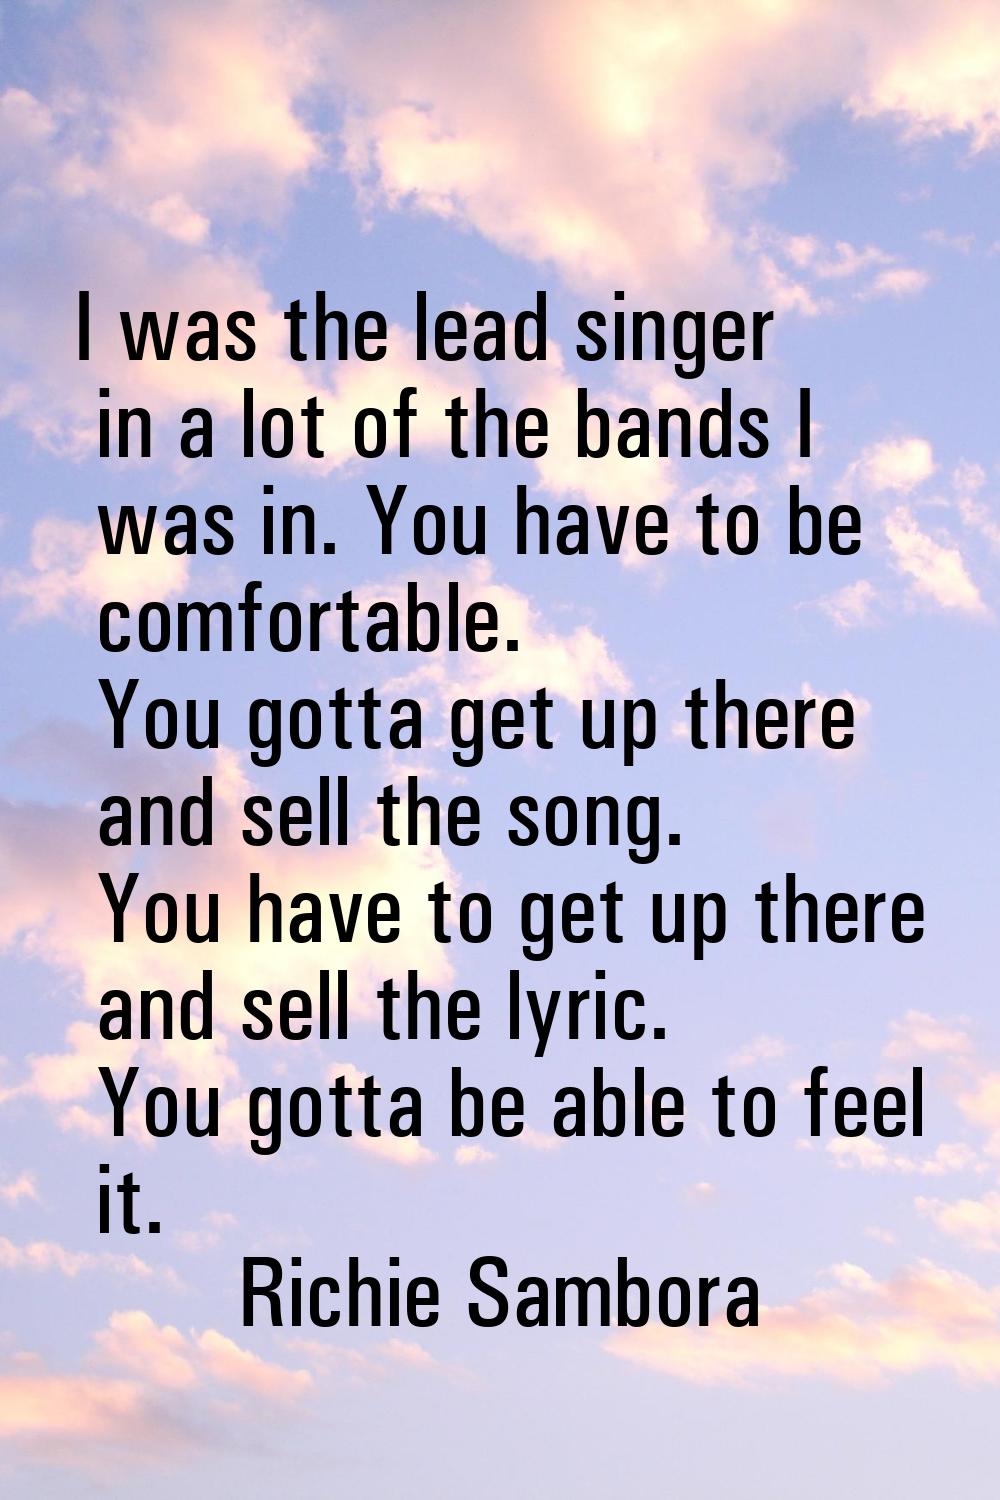 I was the lead singer in a lot of the bands I was in. You have to be comfortable. You gotta get up 